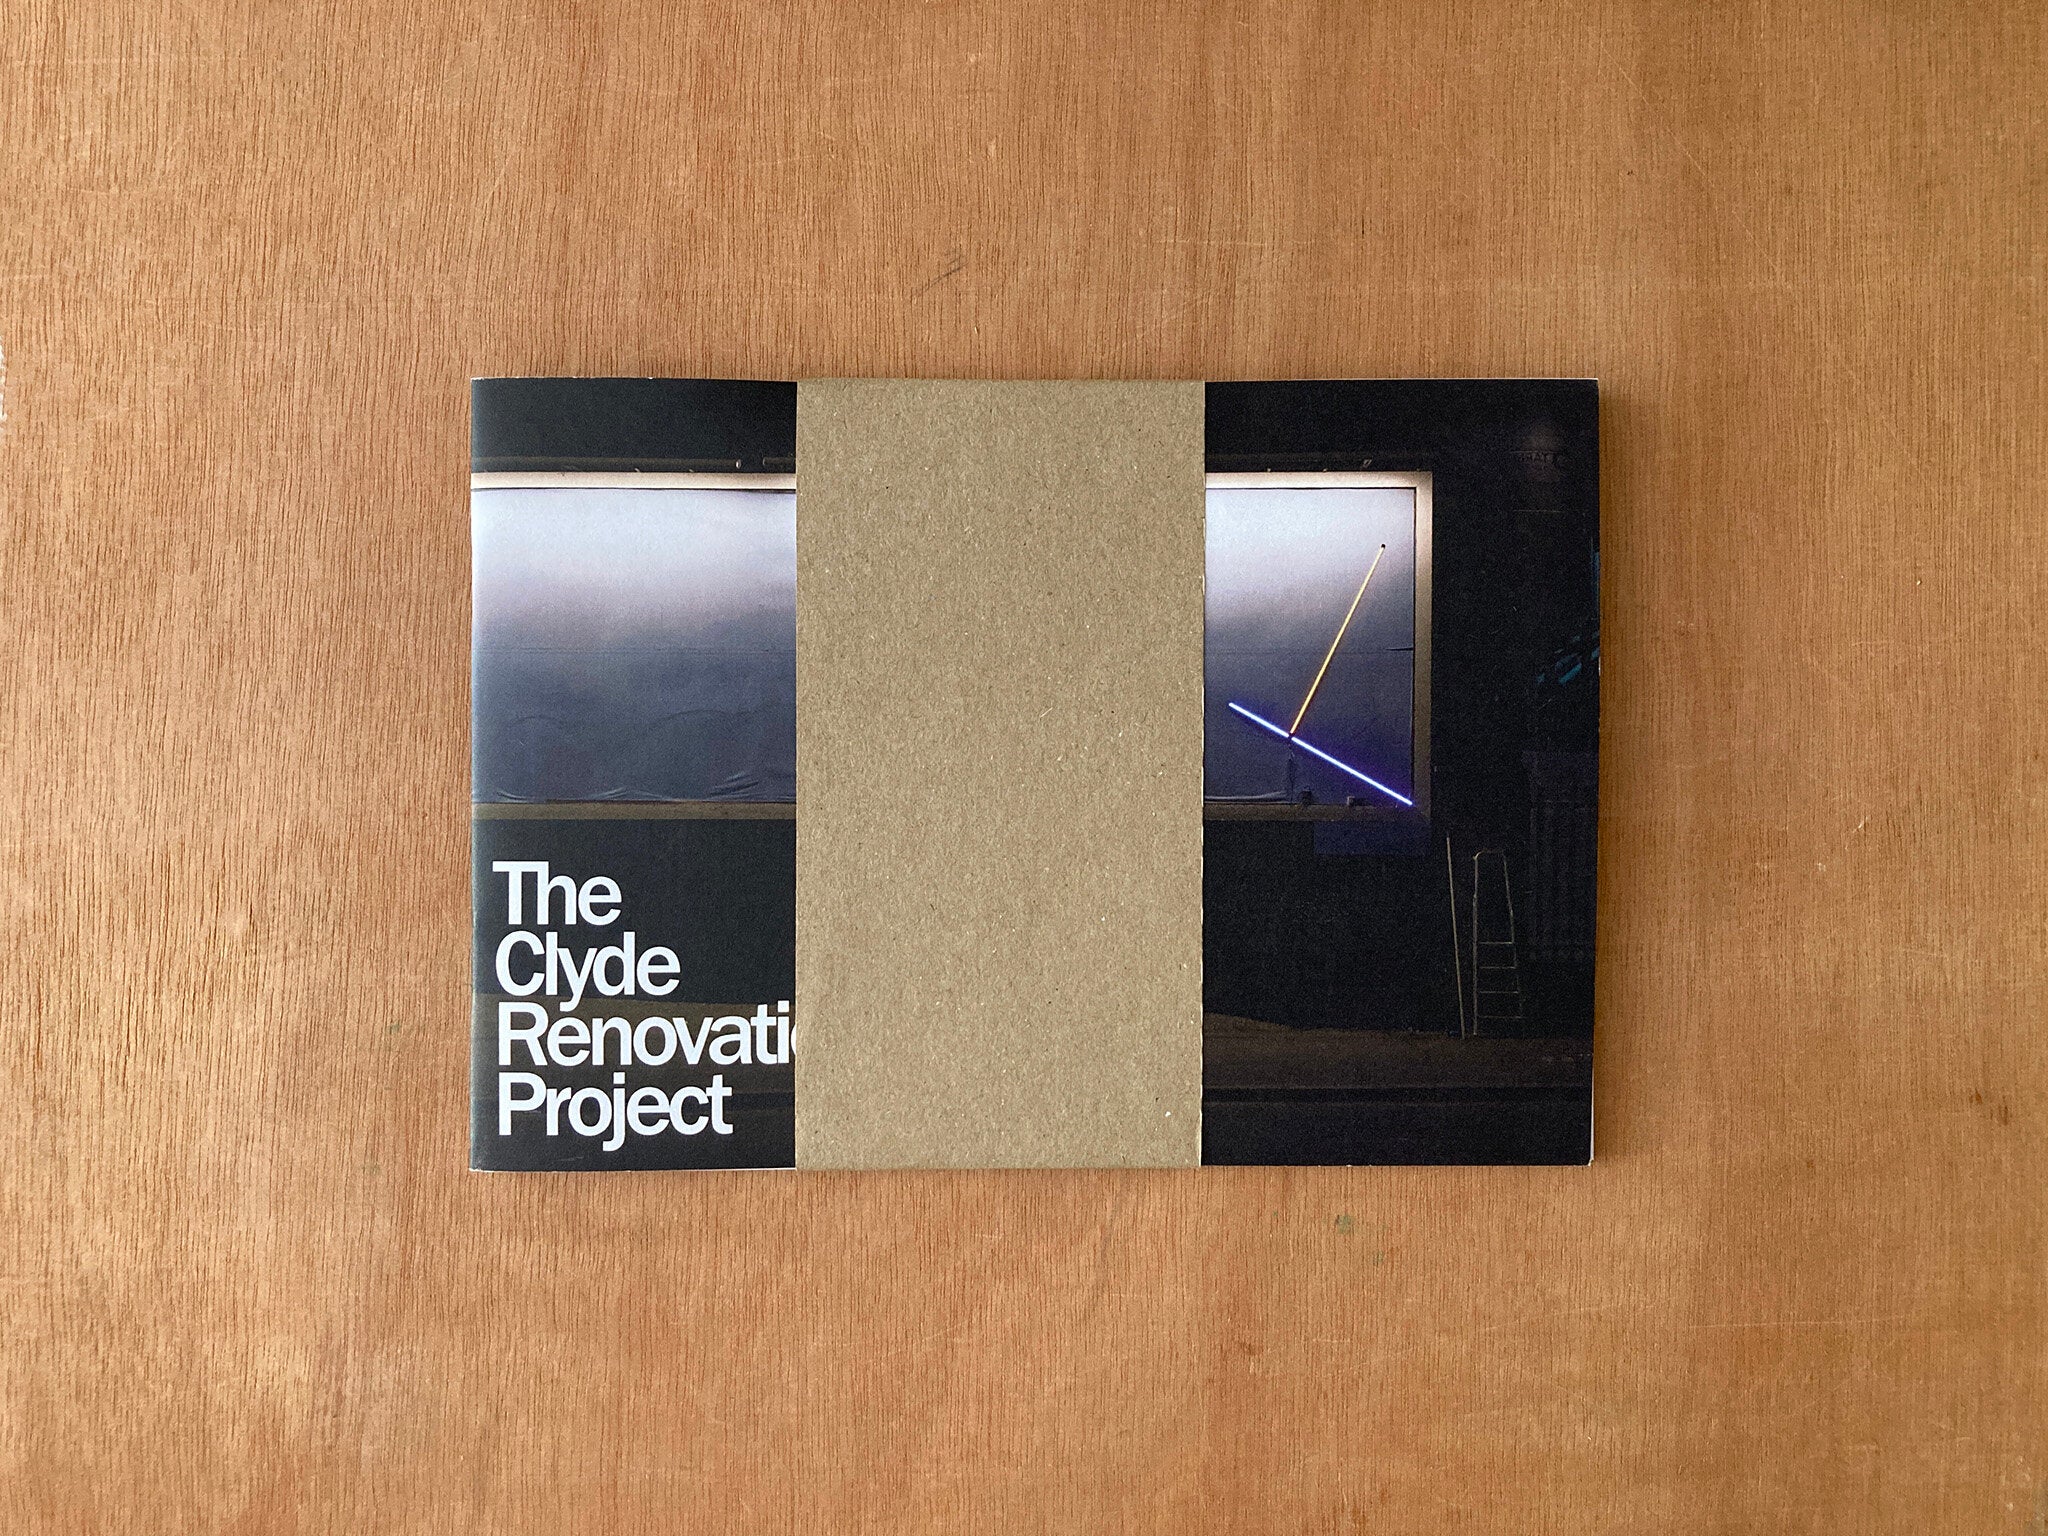 THE CLYDE RENOVATION PROJECT by Lorien Barker